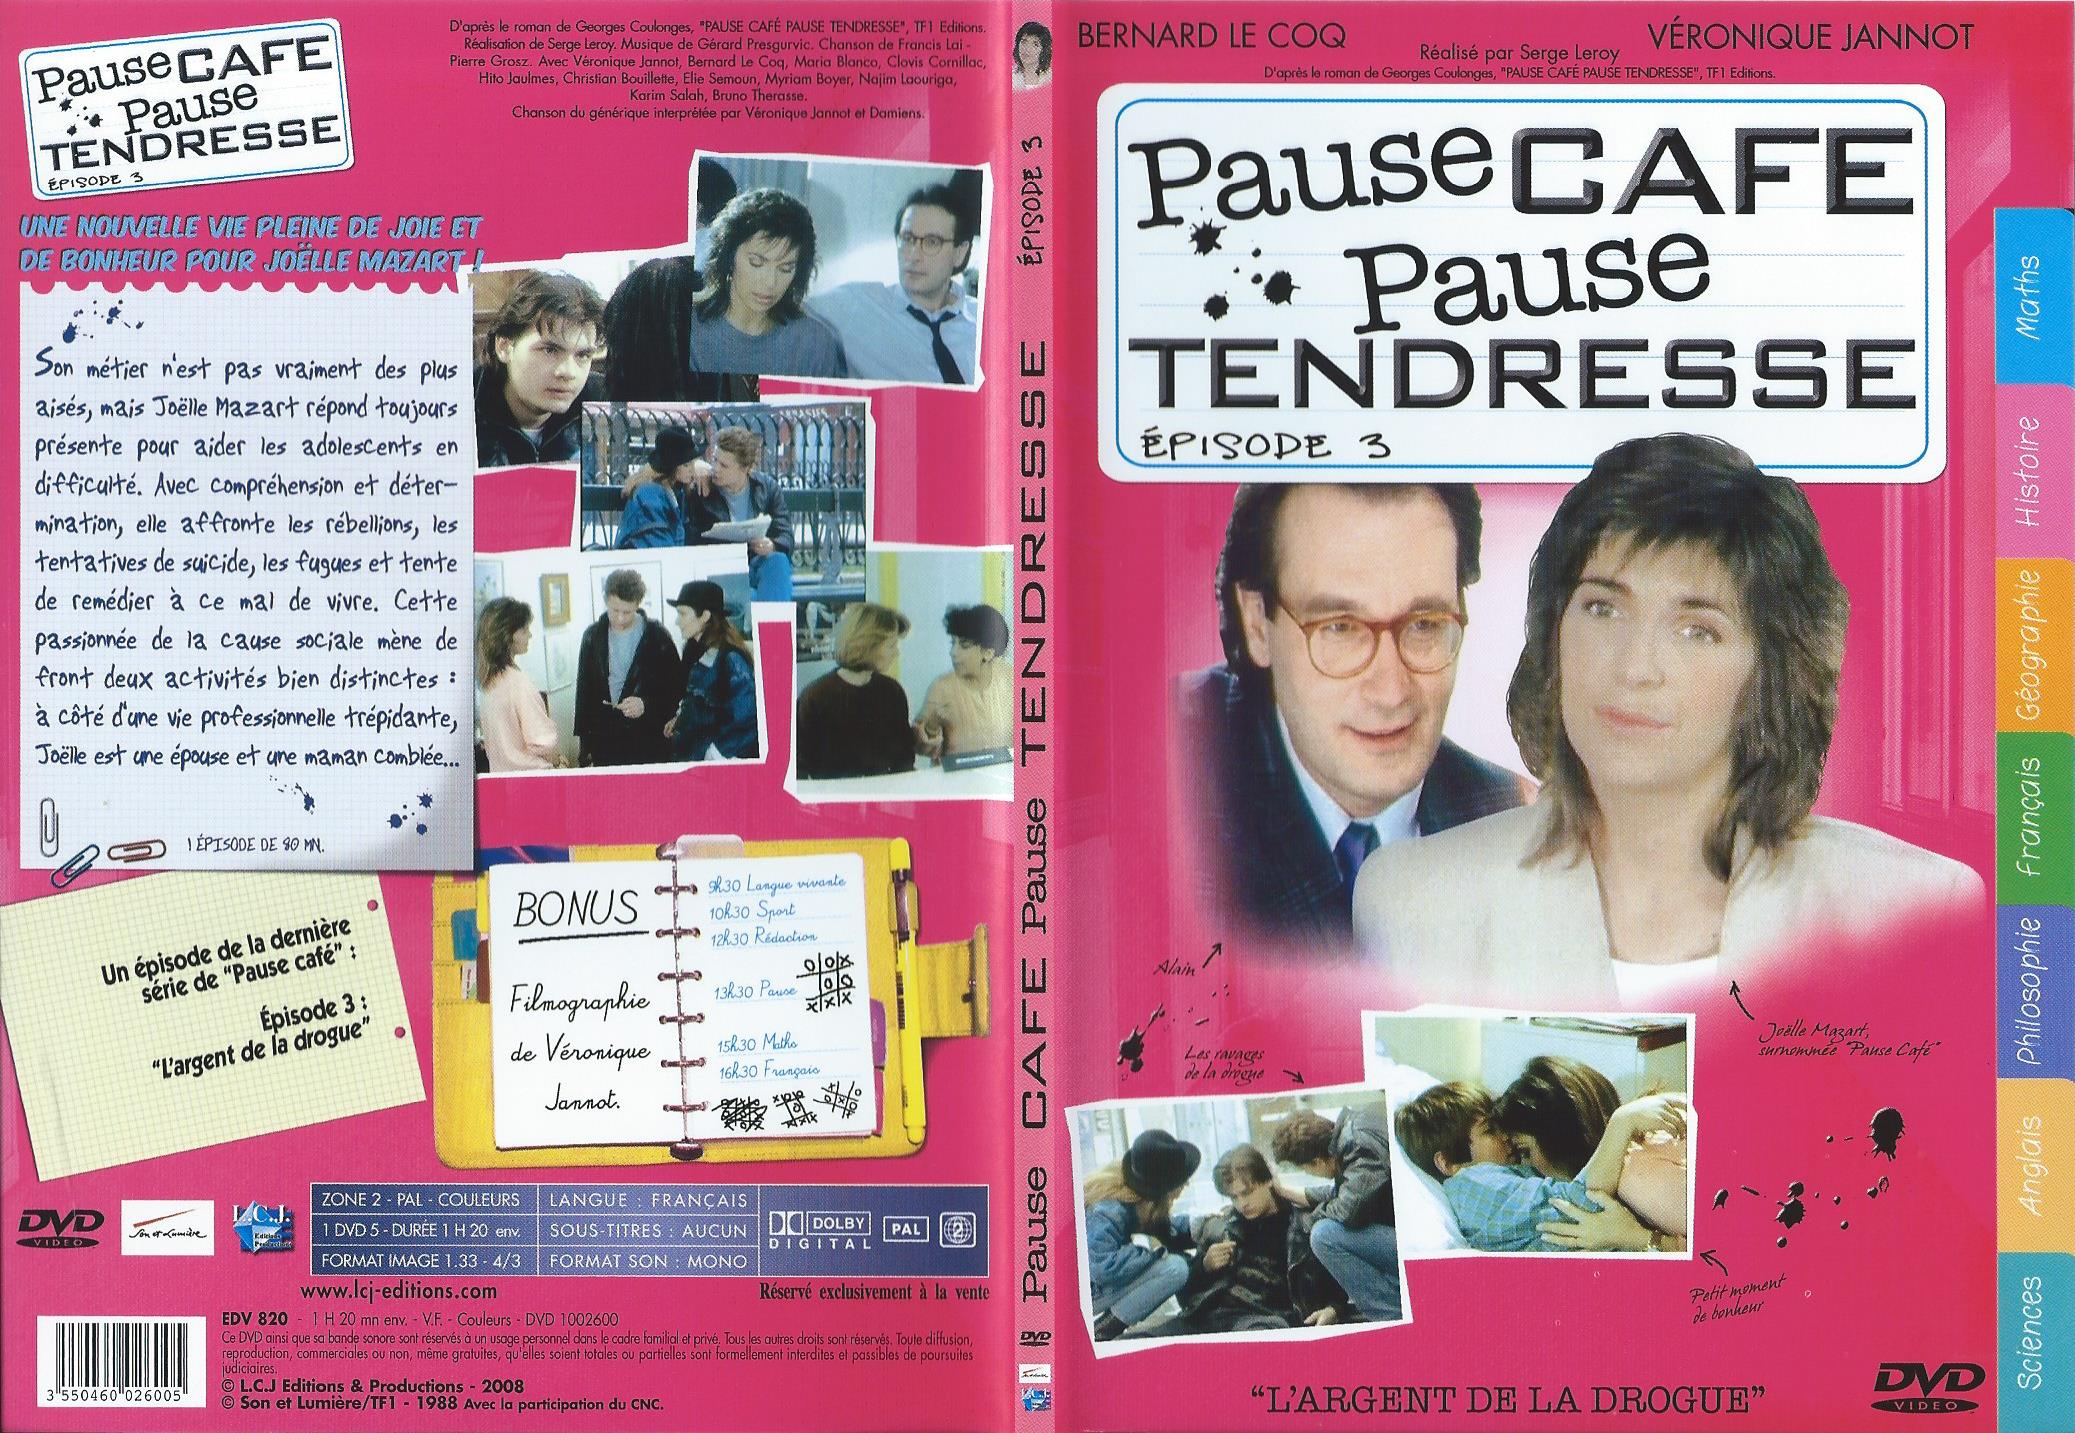 Jaquette DVD Pause Caf, Pause Tendresse DVD 3